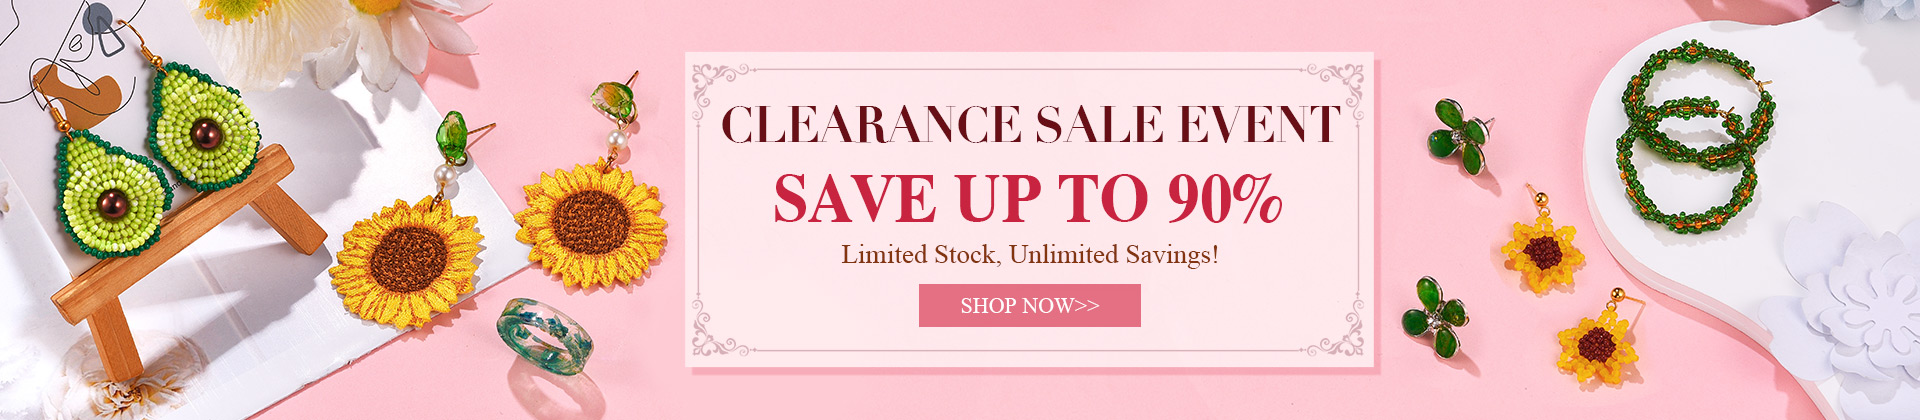 CLEARANCE SALE EVENT